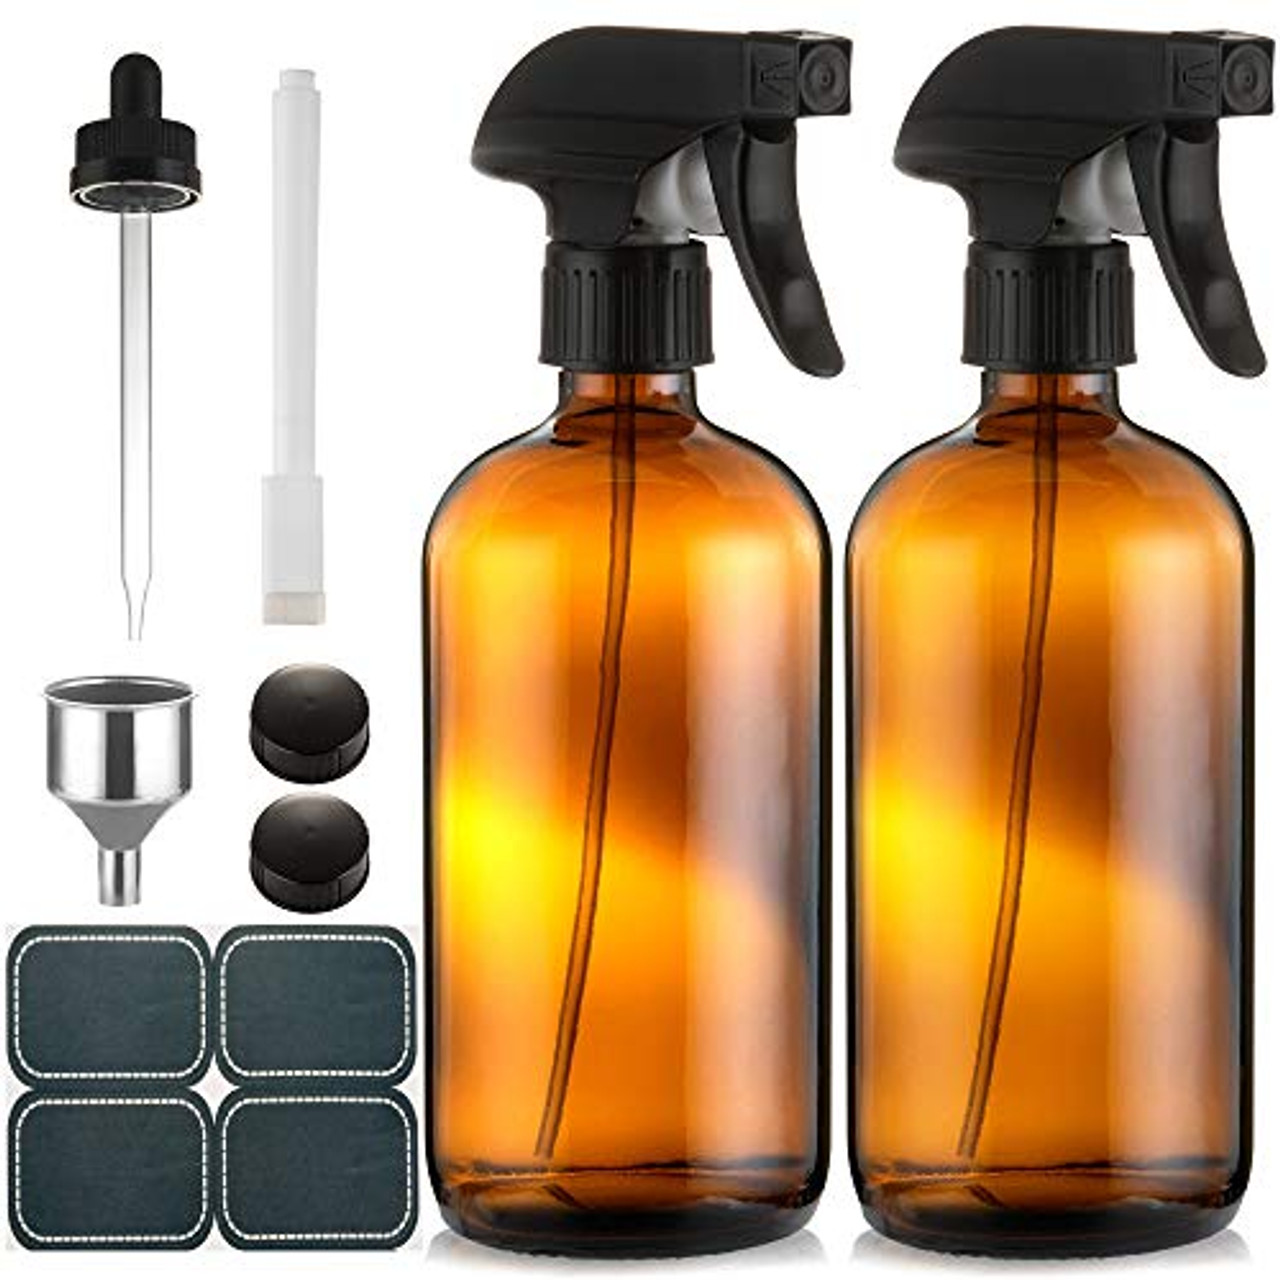 Fantastisch Rommelig Blanco Empty Amber Glass Spray Bottles - (2 Pack) 16 oz with Labels Refillable  Container for Essential Oils, Cleaning Solutions, Cleaning Products, Hair,  Plant Mister, Daily Shower, Gardening or Aromatherapy